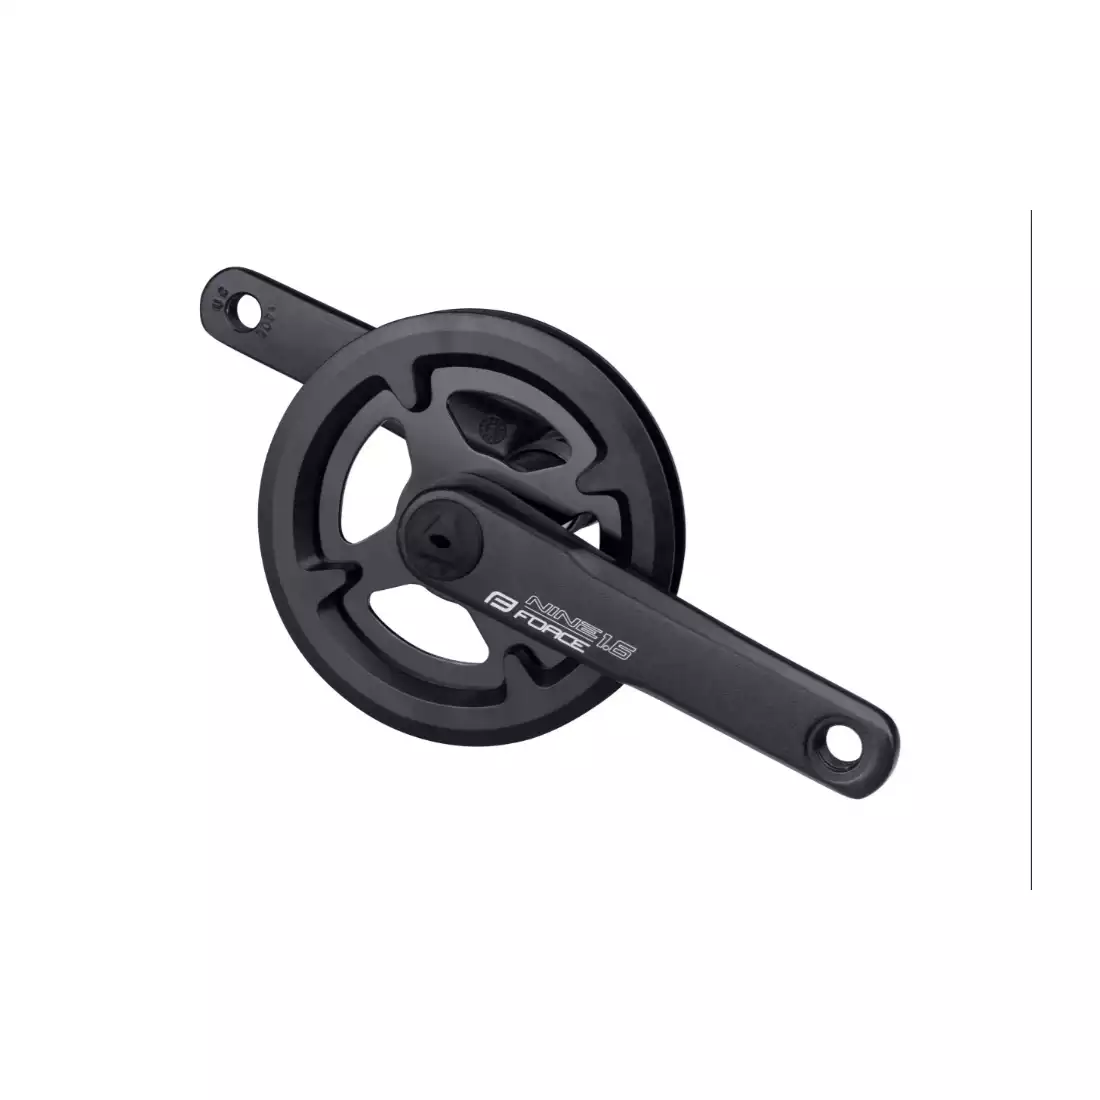 FORCE NINE 1.6 bicycle crank with guard 38T/170 mm aluminum black